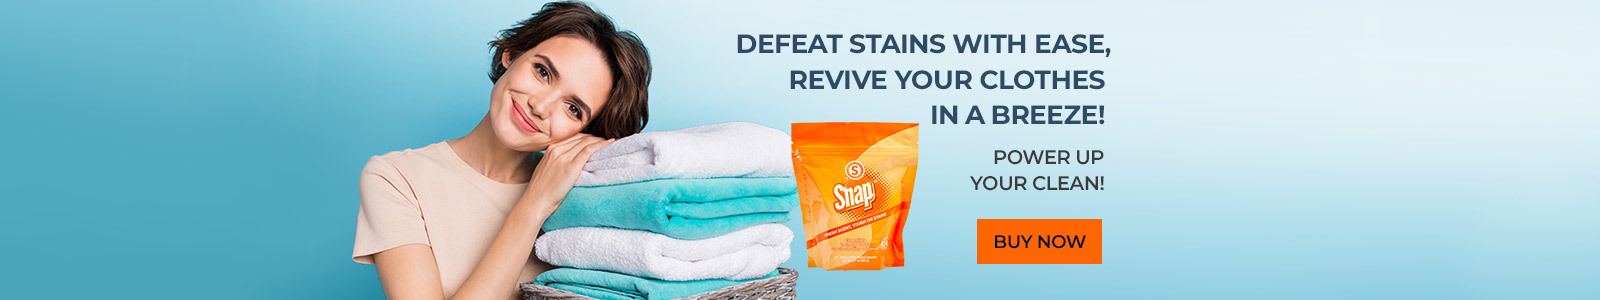 Power up your clean! Buy Now